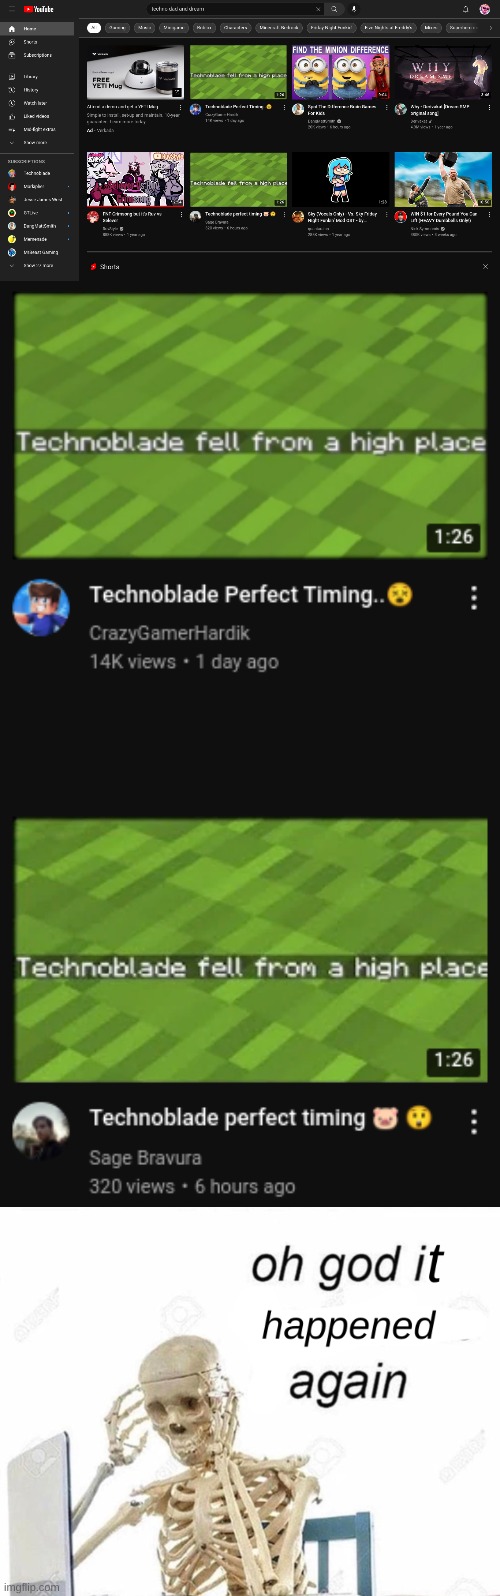 See my last meme to undersatand | image tagged in oh god it happened again | made w/ Imgflip meme maker